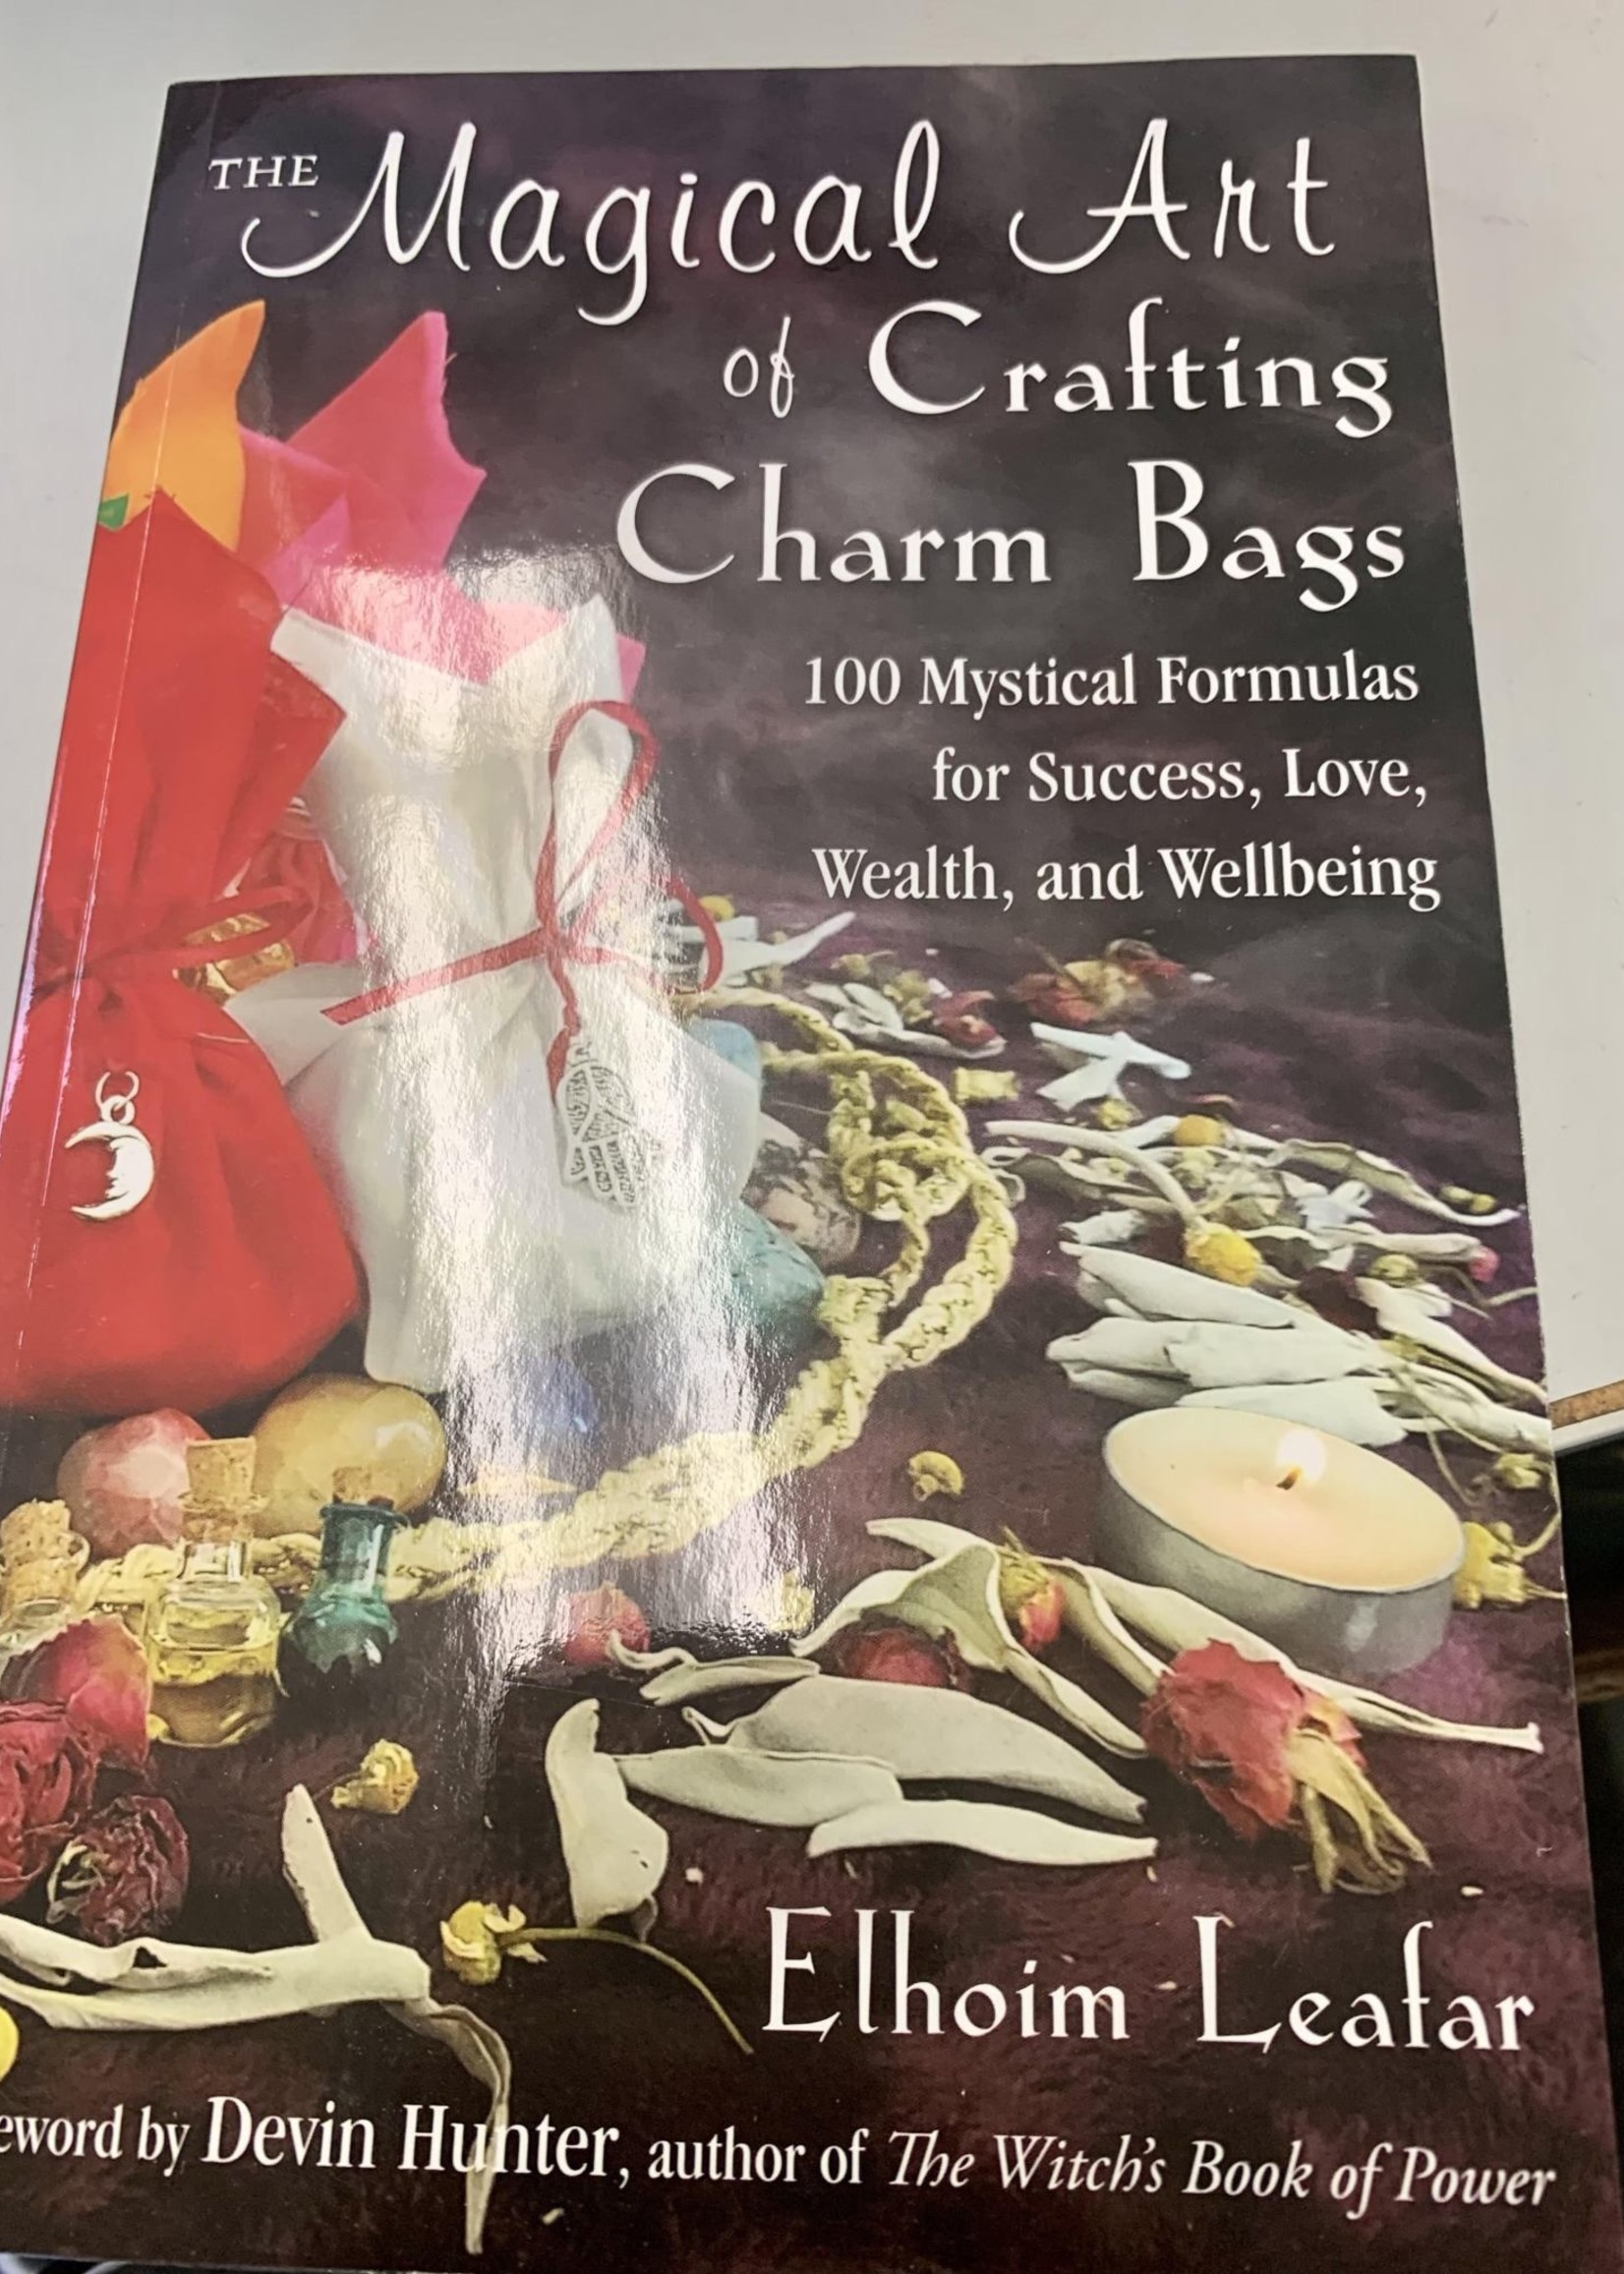 The Magickal Art of Crafting Charm Bags